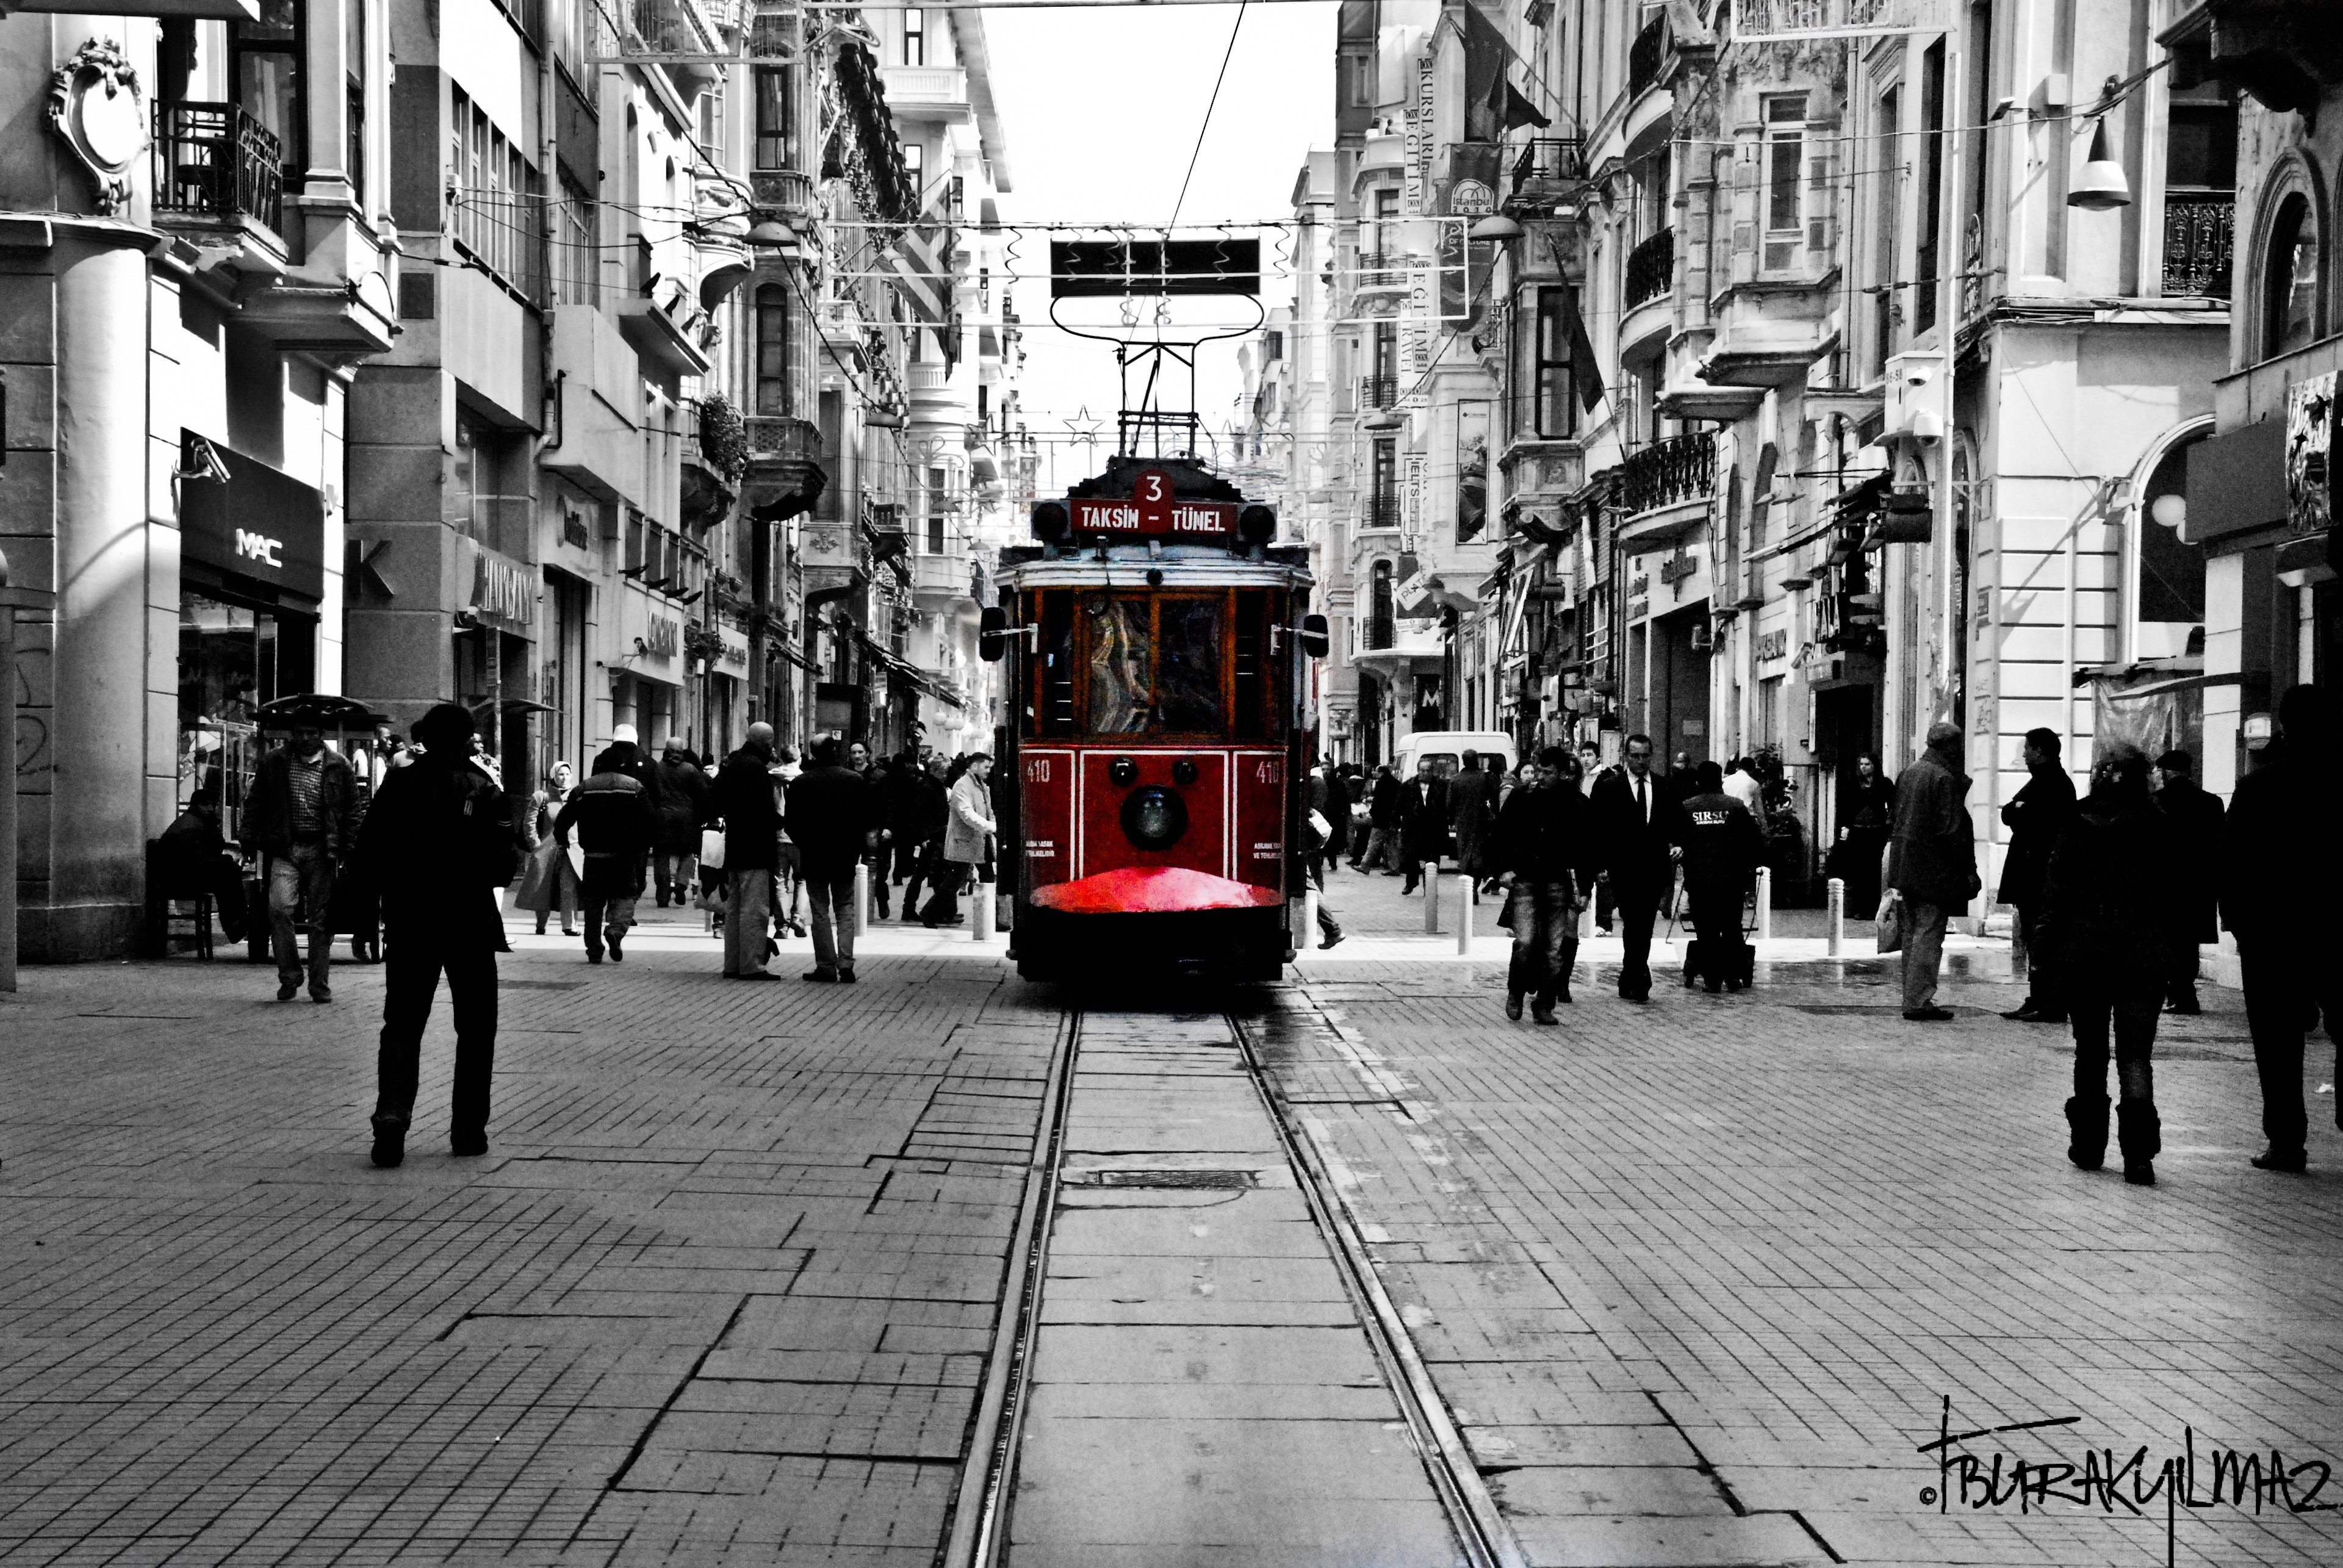 General 3840x2570 Istanbul Turkey taksim selective coloring vehicle cityscape